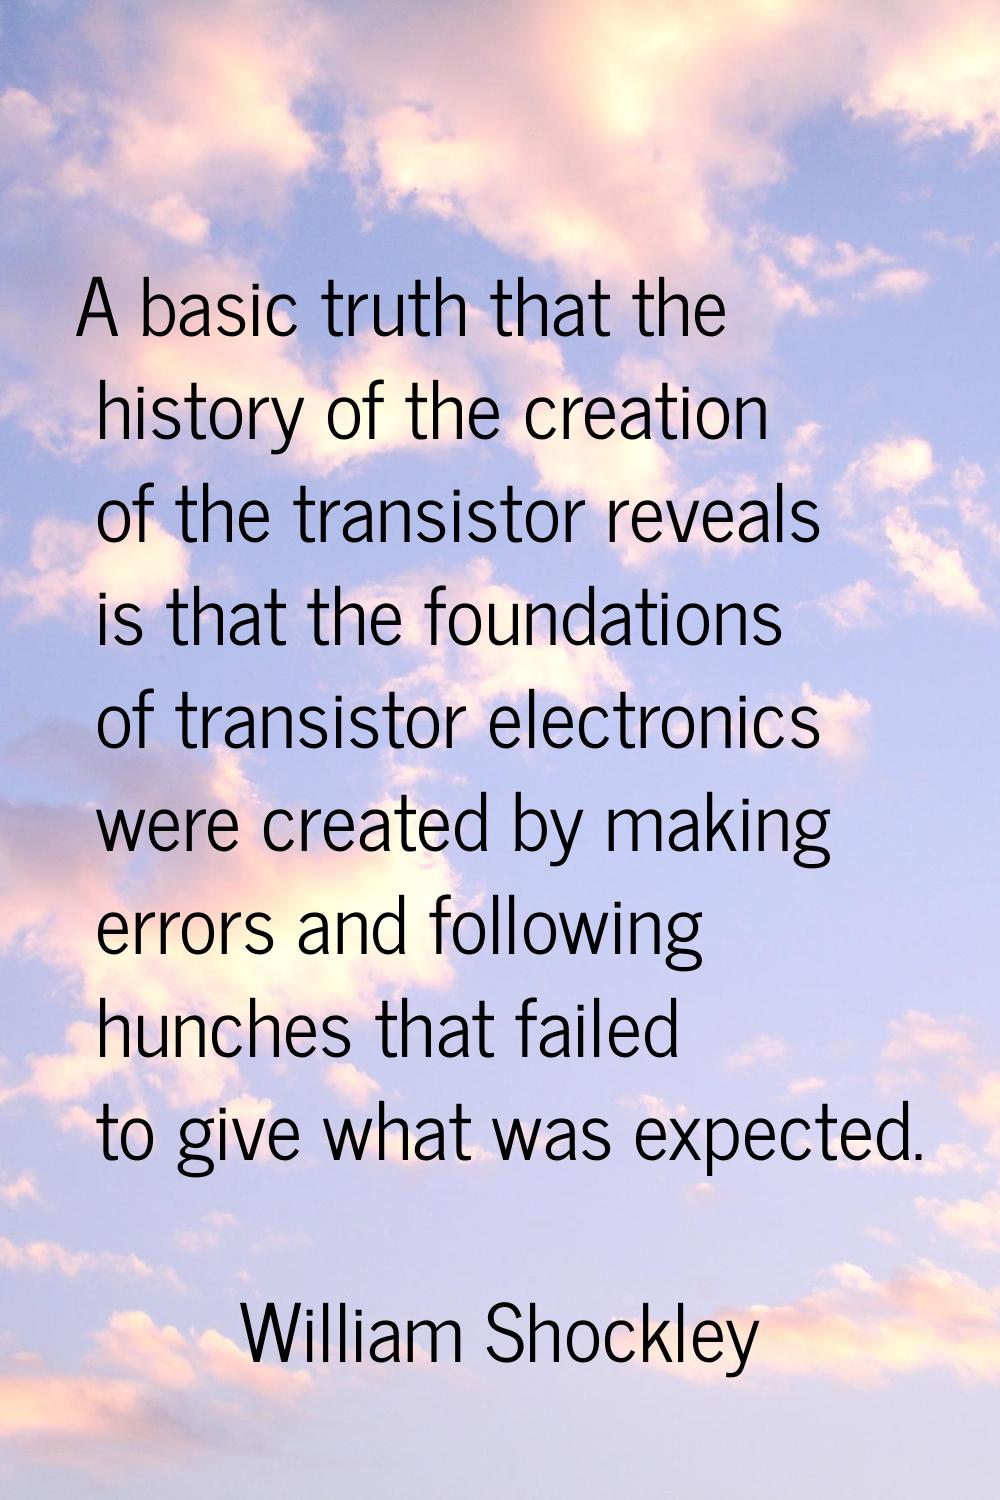 A basic truth that the history of the creation of the transistor reveals is that the foundations of